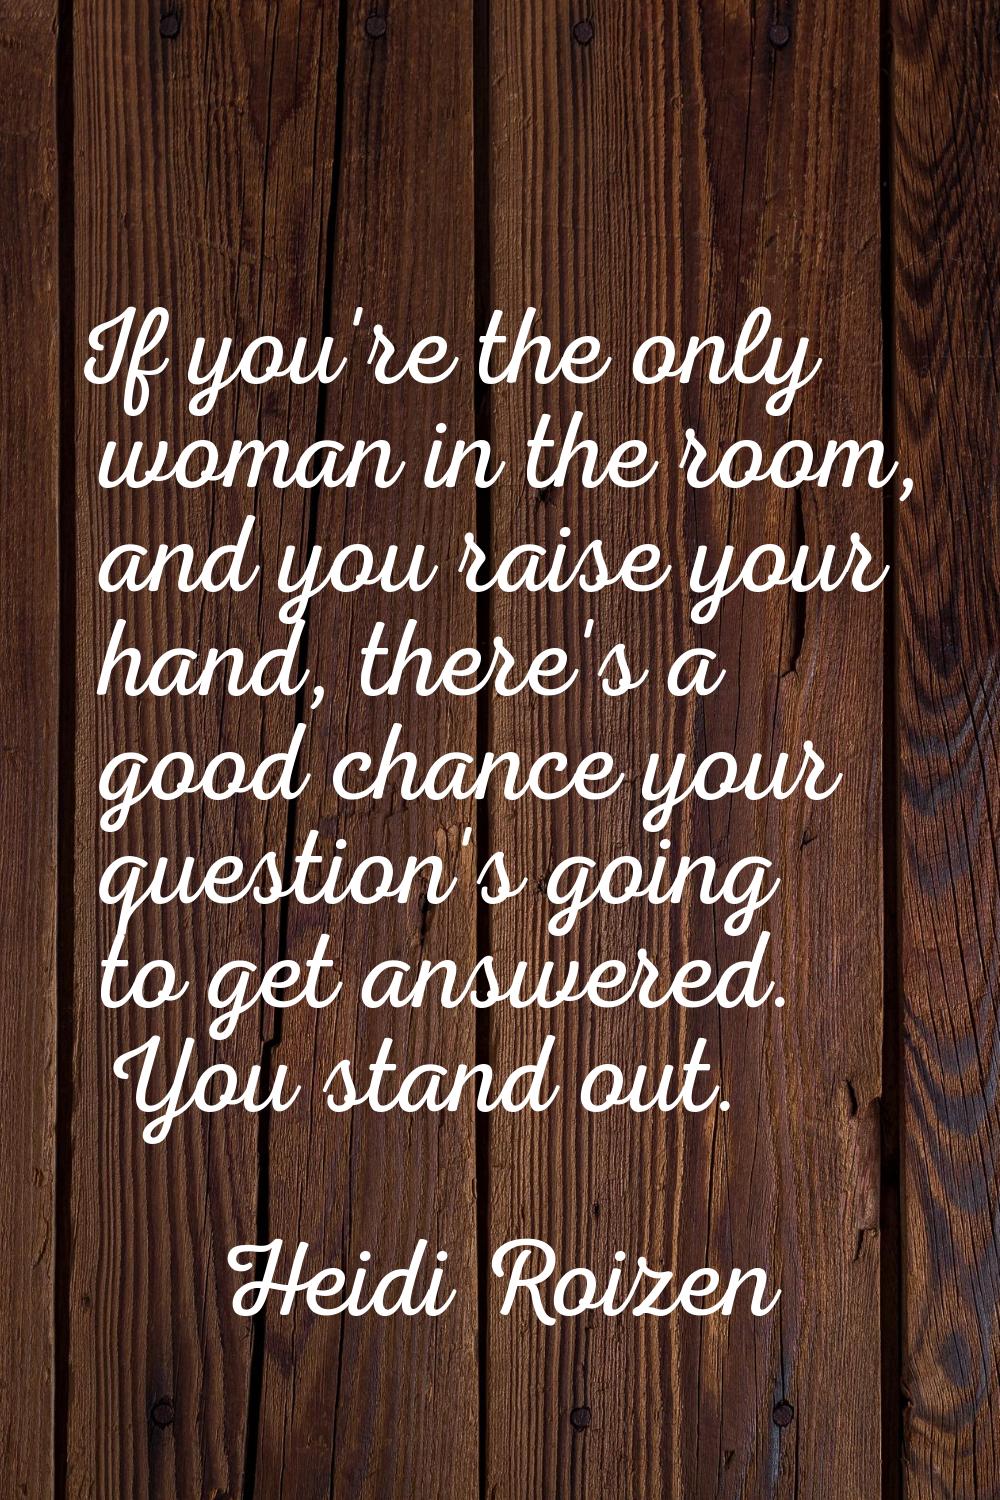 If you're the only woman in the room, and you raise your hand, there's a good chance your question'